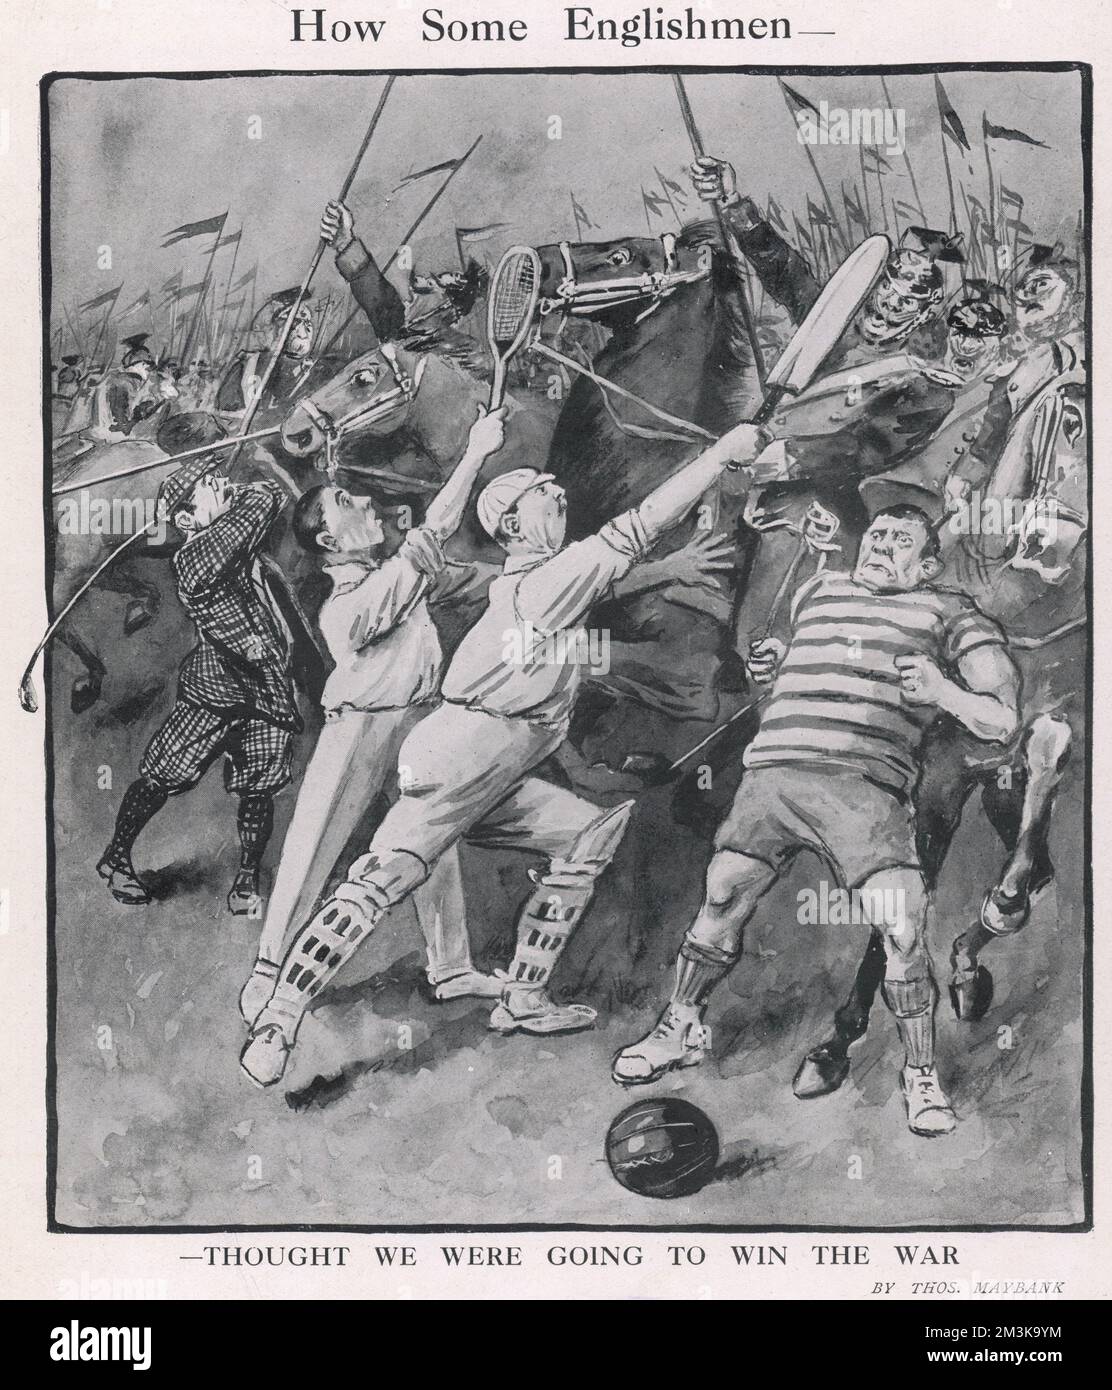 Humorous cartoon showing Englishmen, armed with cricket bats, golf clubs and rugby balls giving the Hun a good thrashing - a satirical view on how some thought World War One could be won in the opening months of the conflict.     Date: 1914 Stock Photo